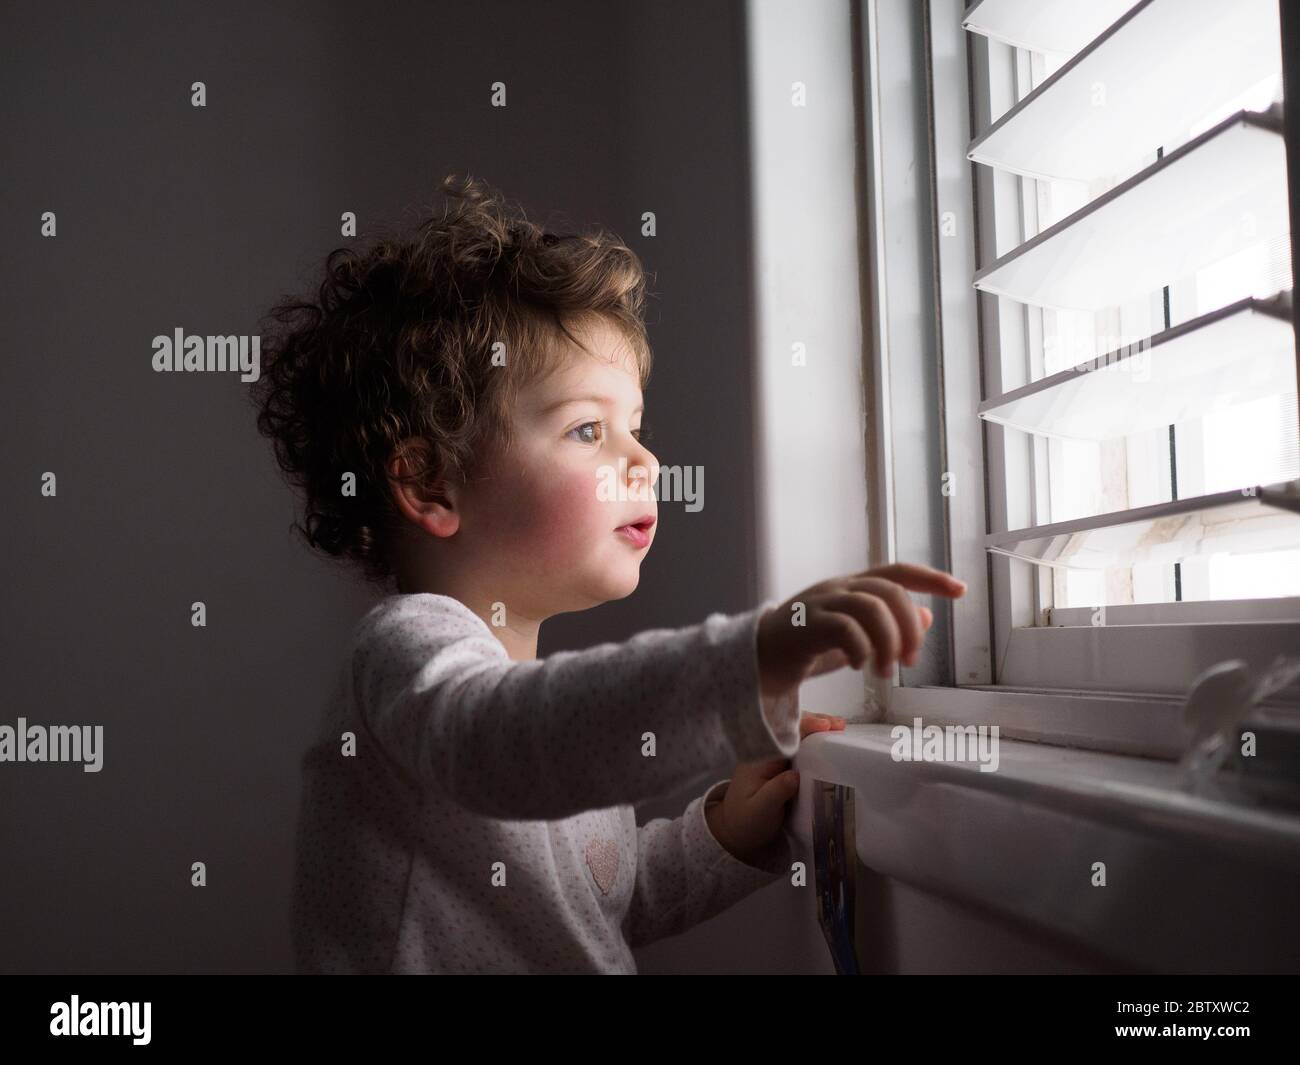 Two year old toddler looks out of the window Stock Photo